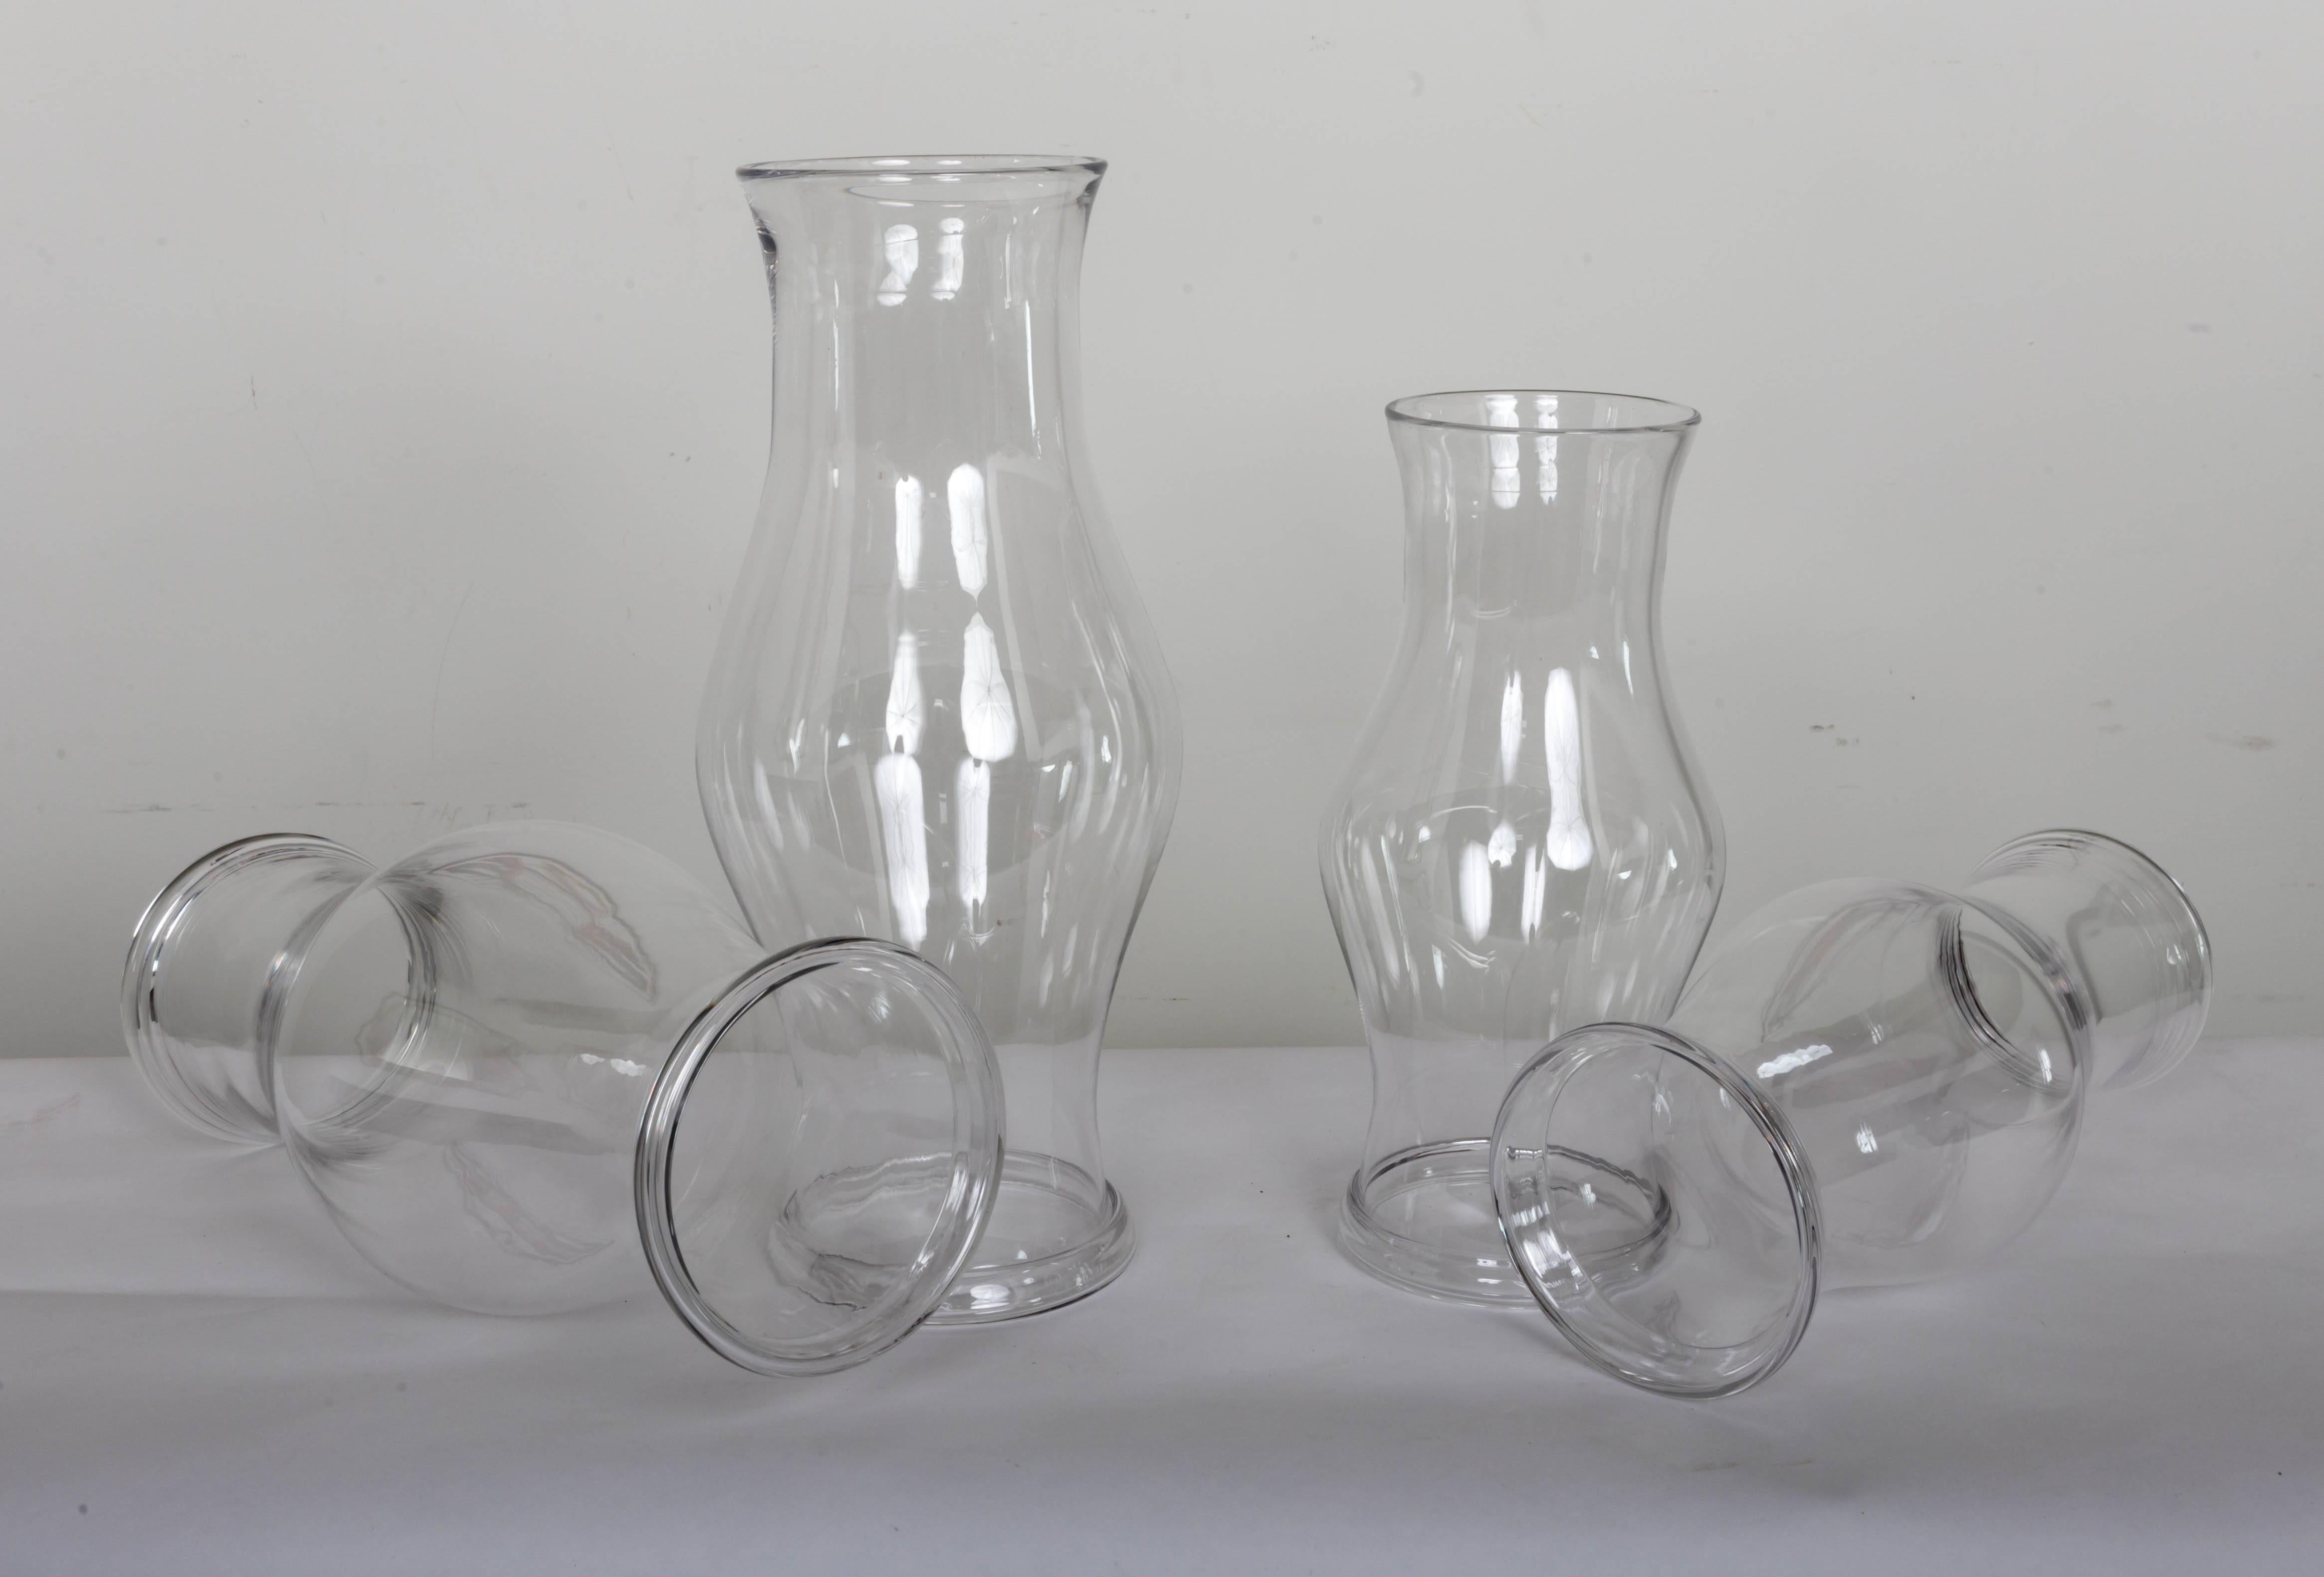 Set of four handblown hurricane shades. Mid-late 19th century. Heavy mantel base.
Measures: Large shades measures 18inch;; H x 8.5inch;(widest) 5 3/4inch; top opening
Small shades measures 14 inch; H x 6.5 inch;(widest) 4 3/4 inch; top opening.